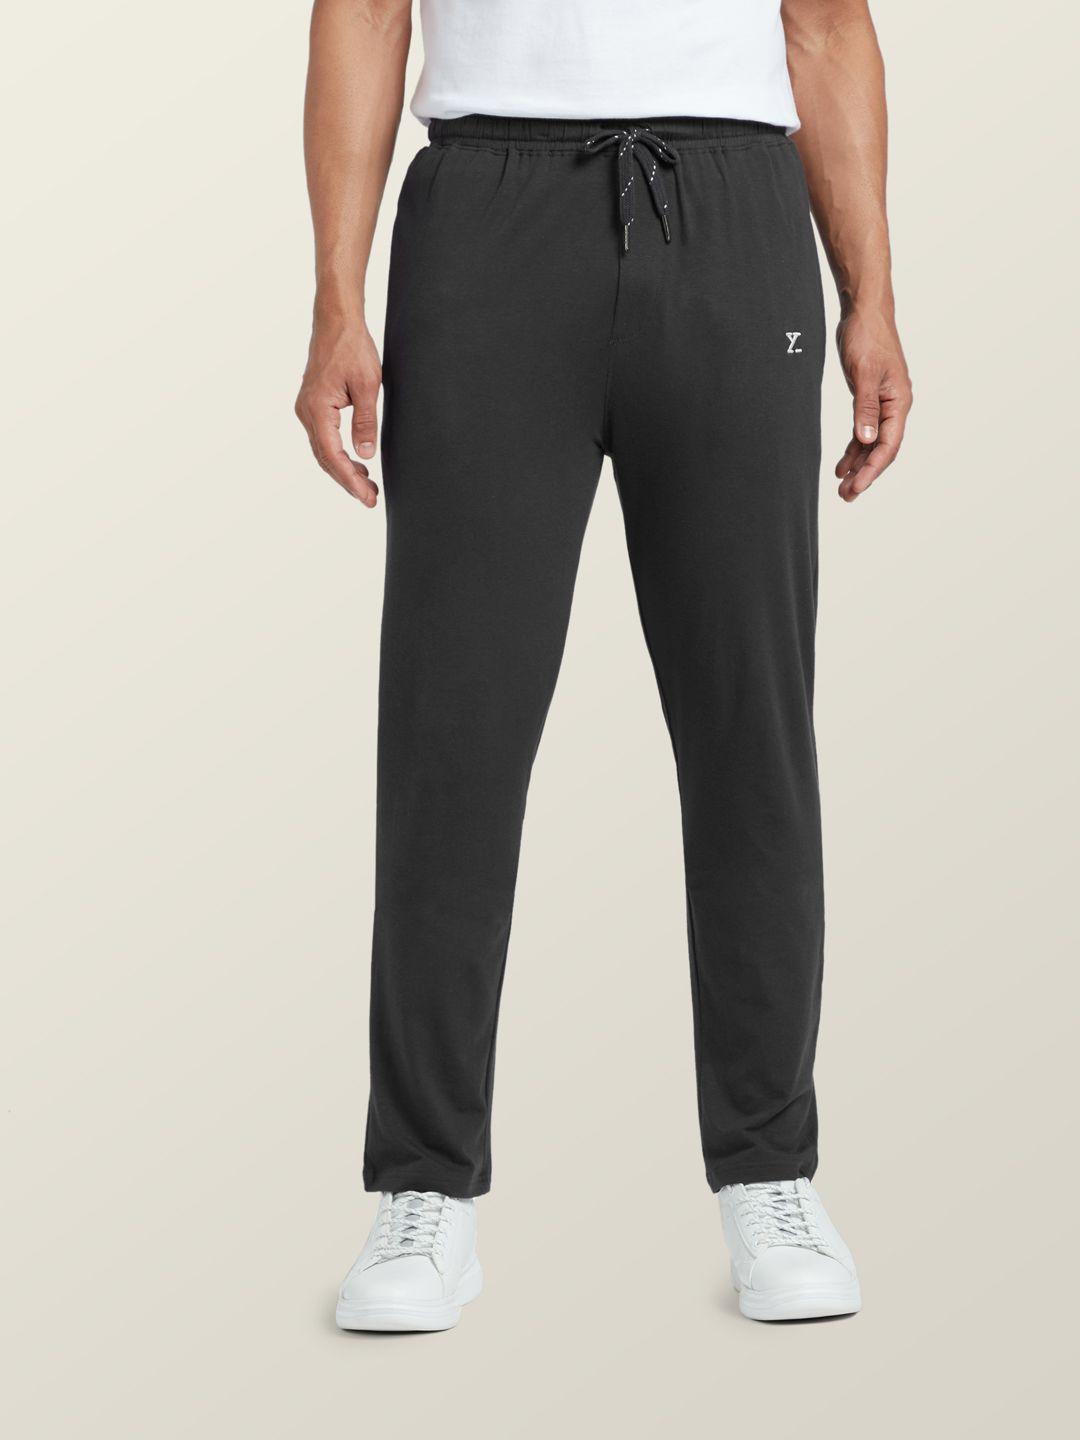 xyxx-men-grey-solid-antimicrobial-cotton-modal-casual-lounge-pant-with-zipper-pocket